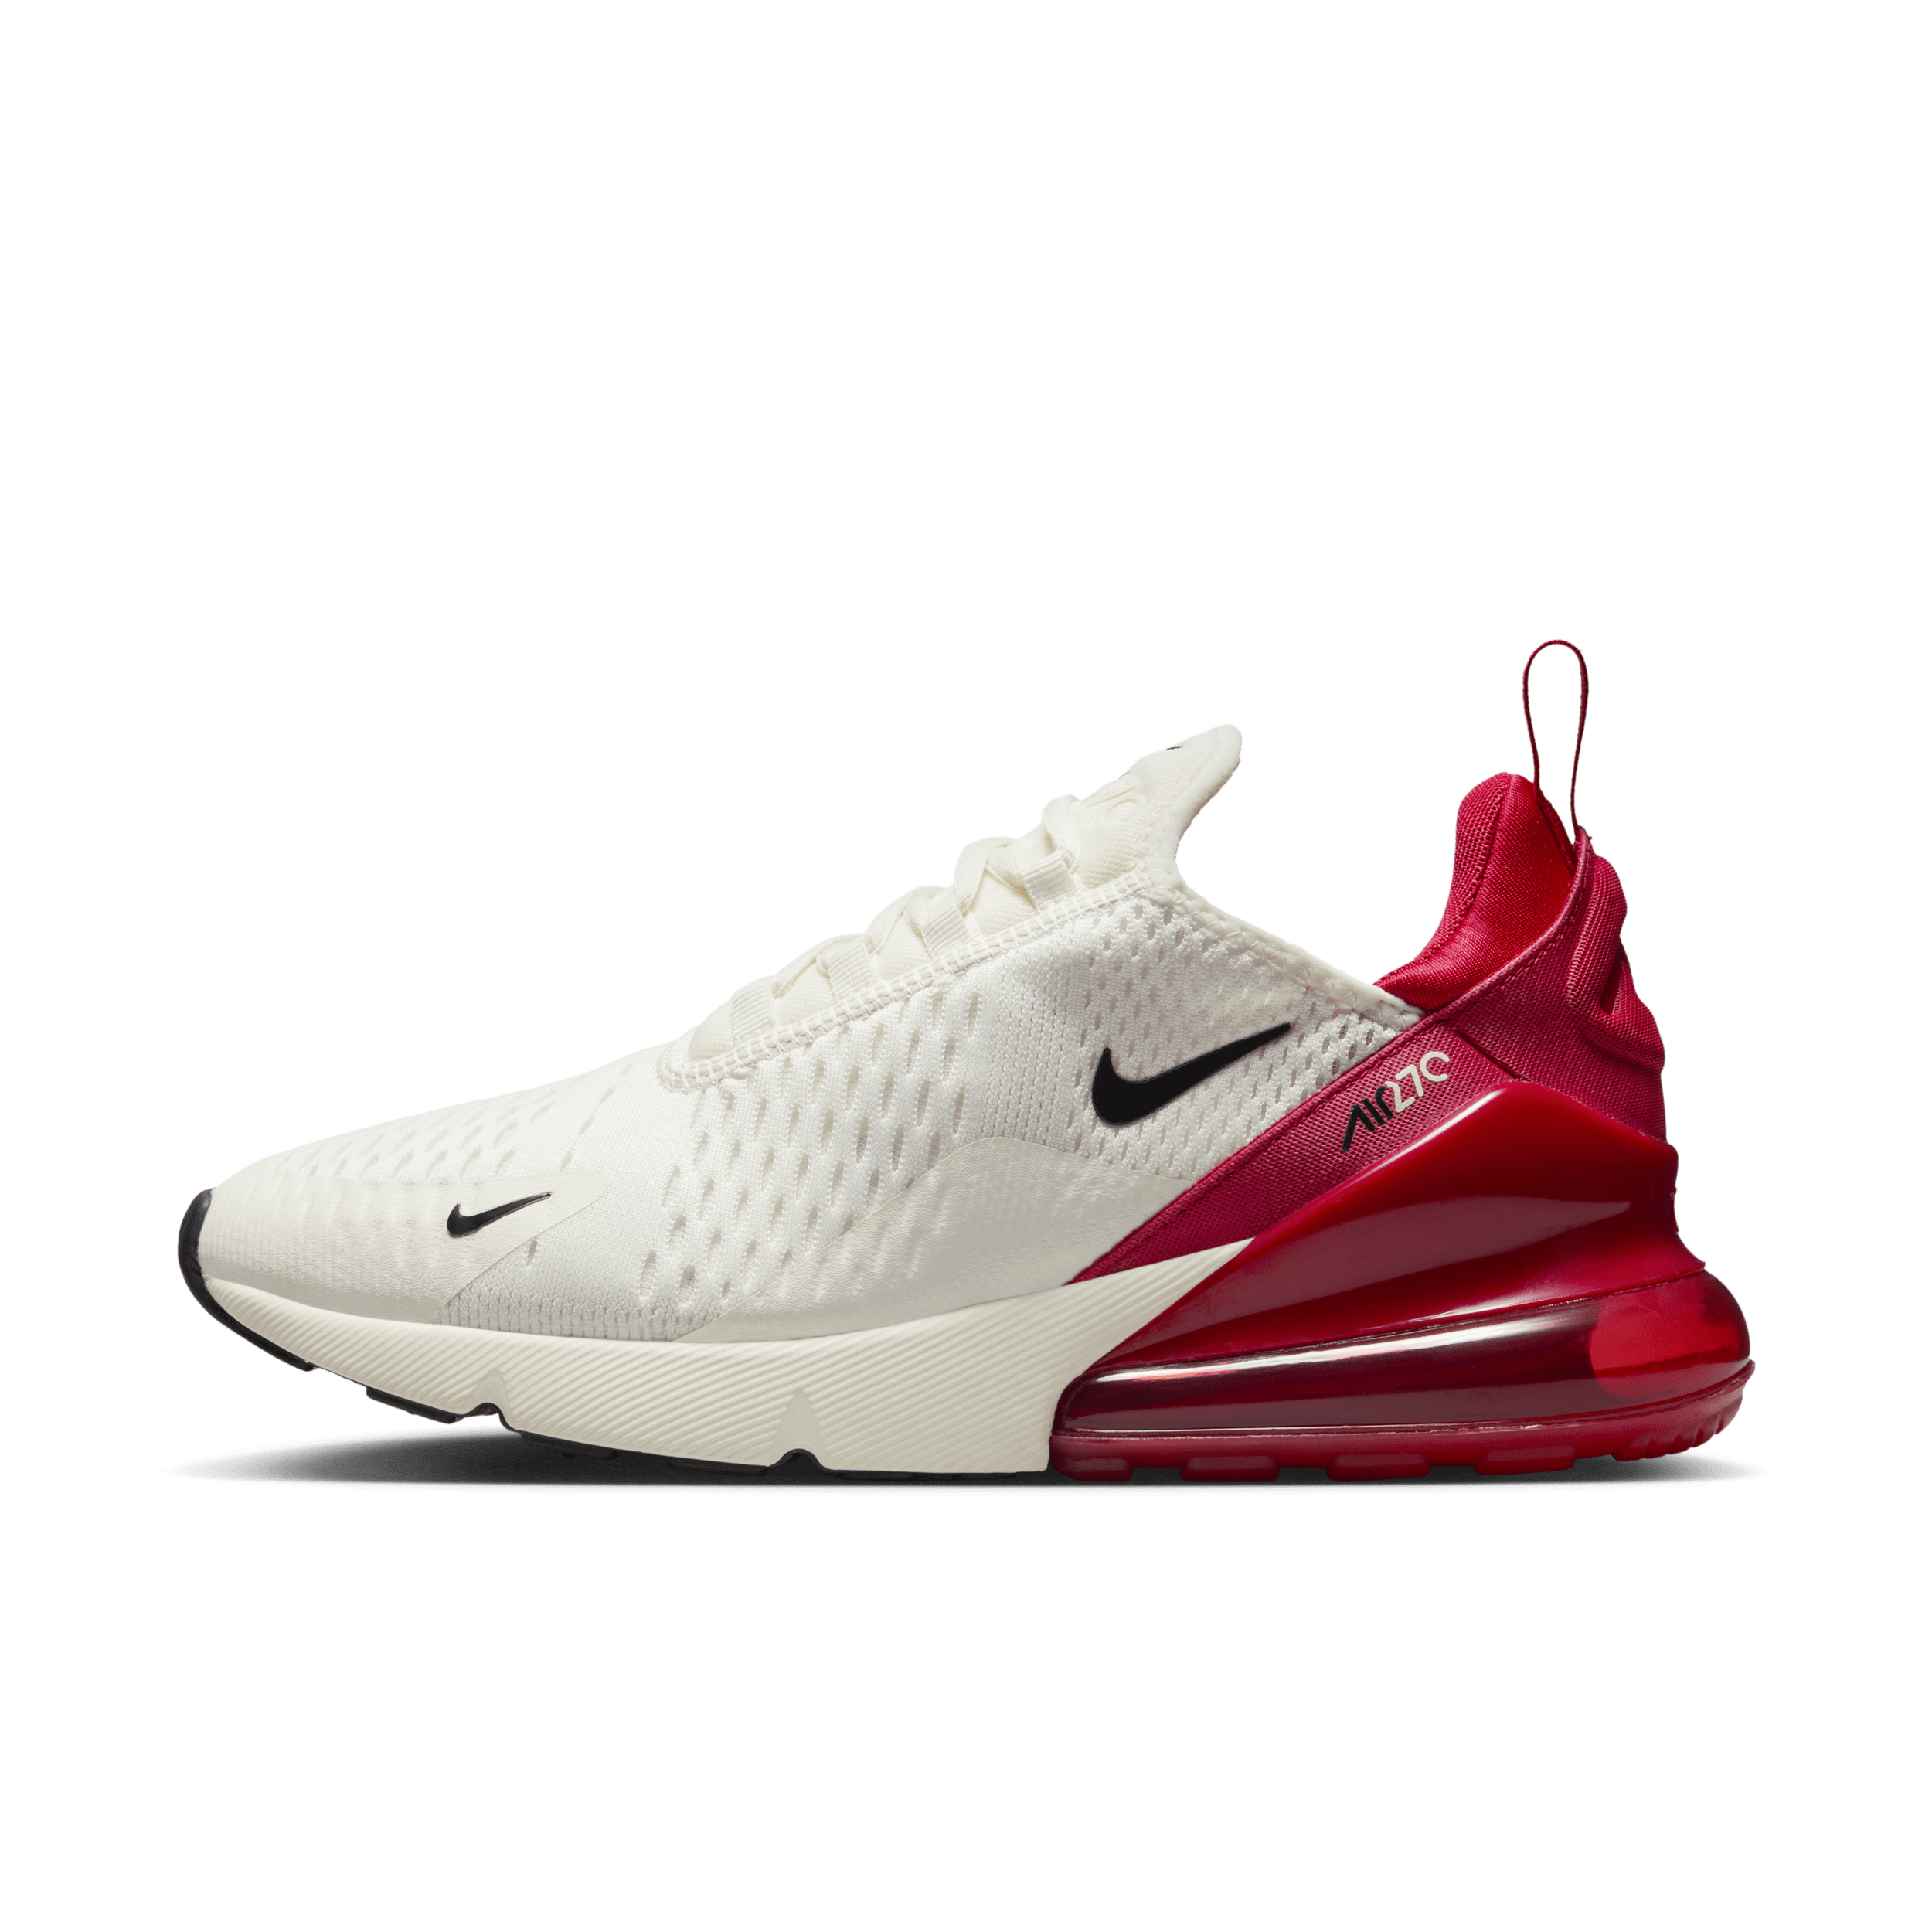 Scarpa Nike Air Max 270 - Donna - Rosso